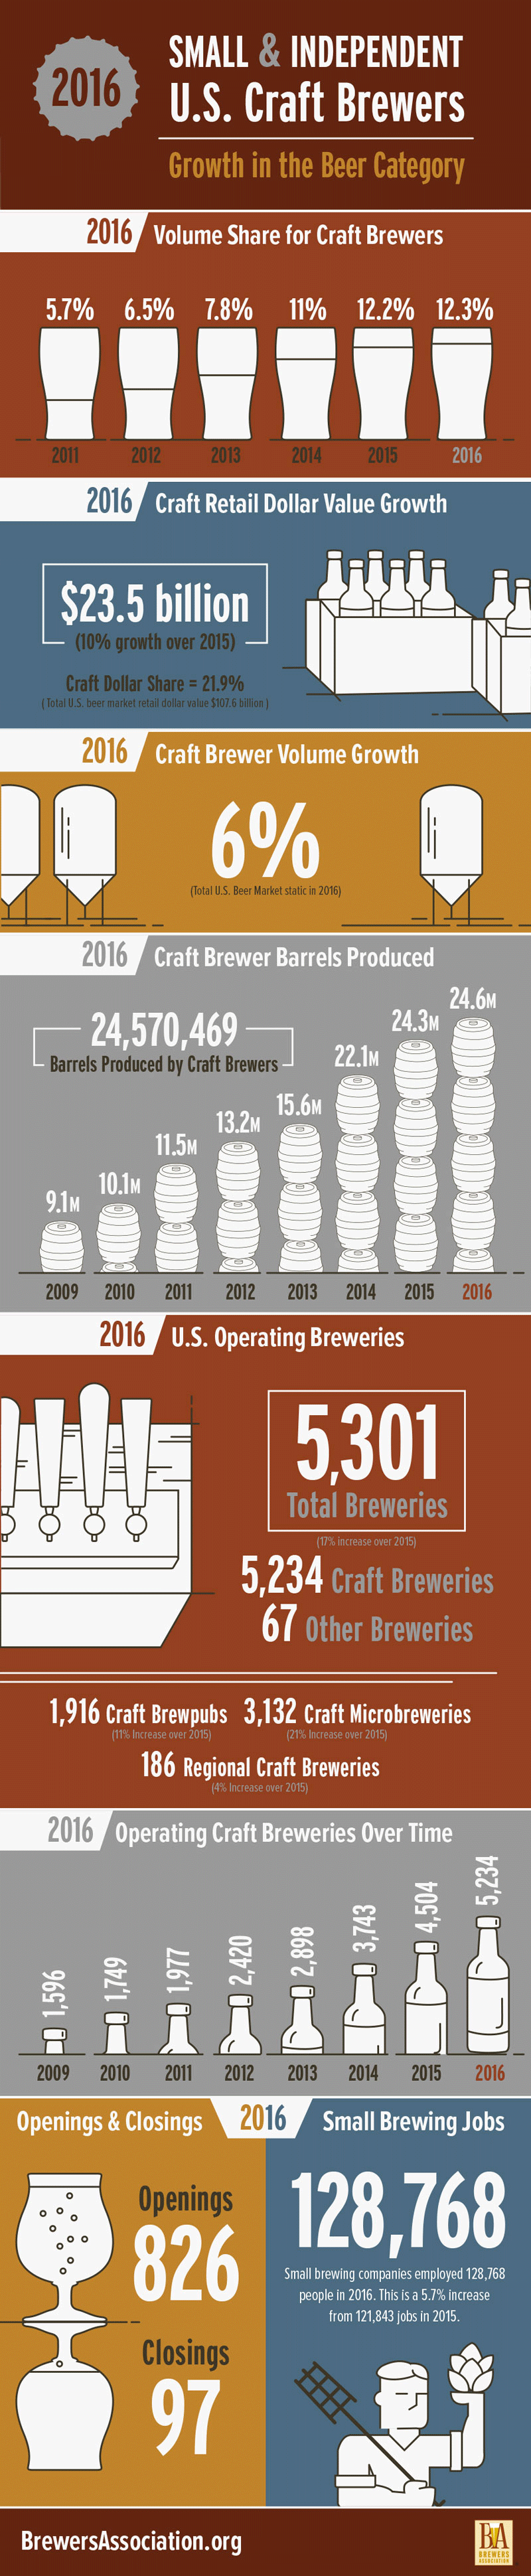 Image courtesy of the Brewers Association